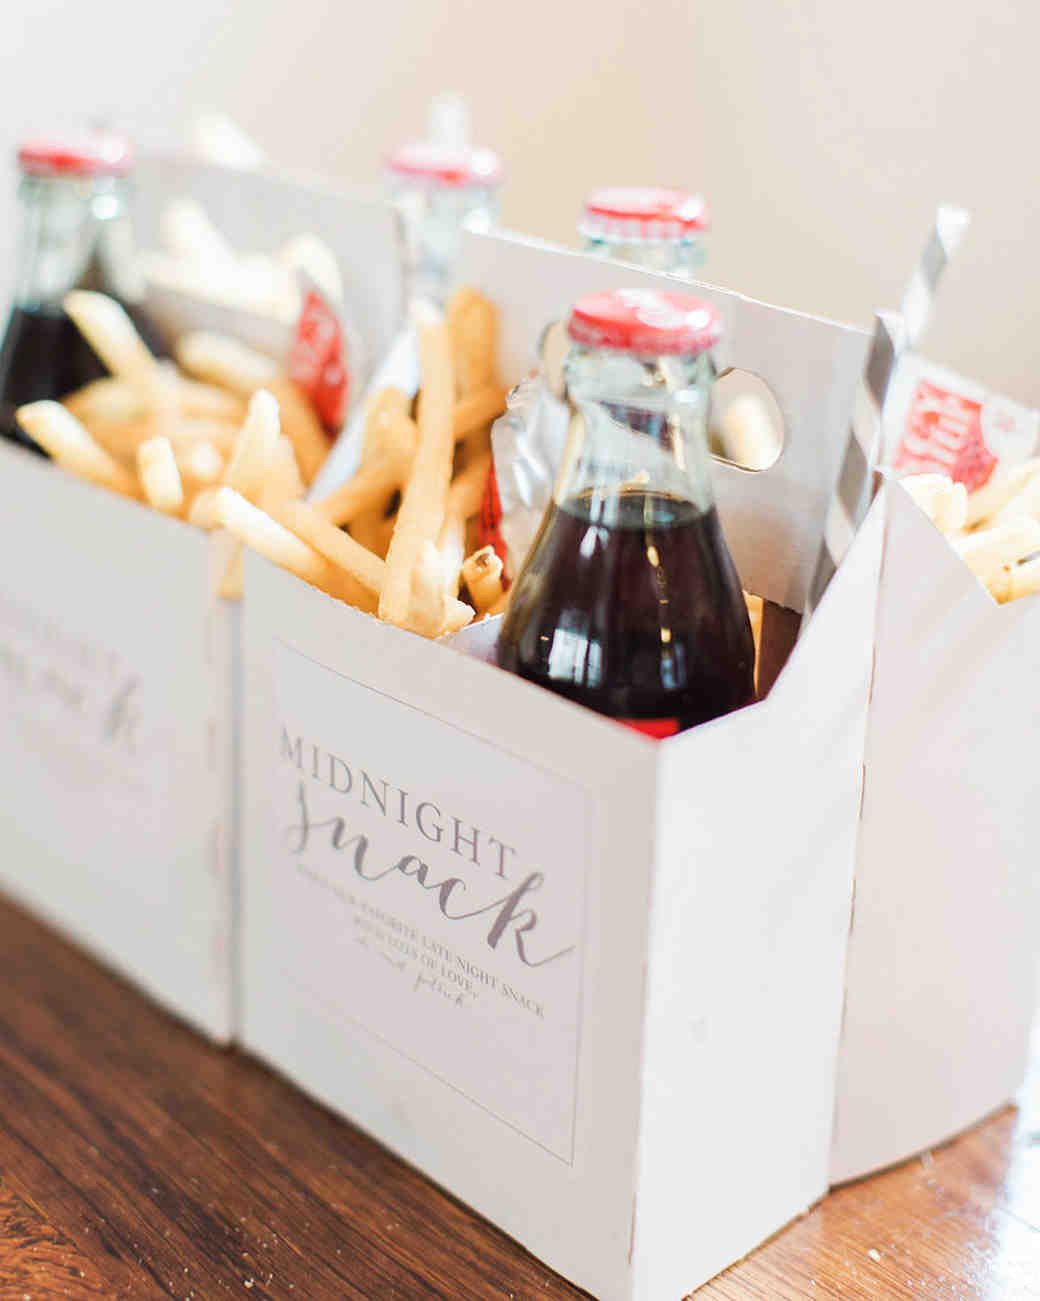 Good Ideas For Engagement Party Gifts
 50 Creative Wedding Favors That Will Delight Your Guests